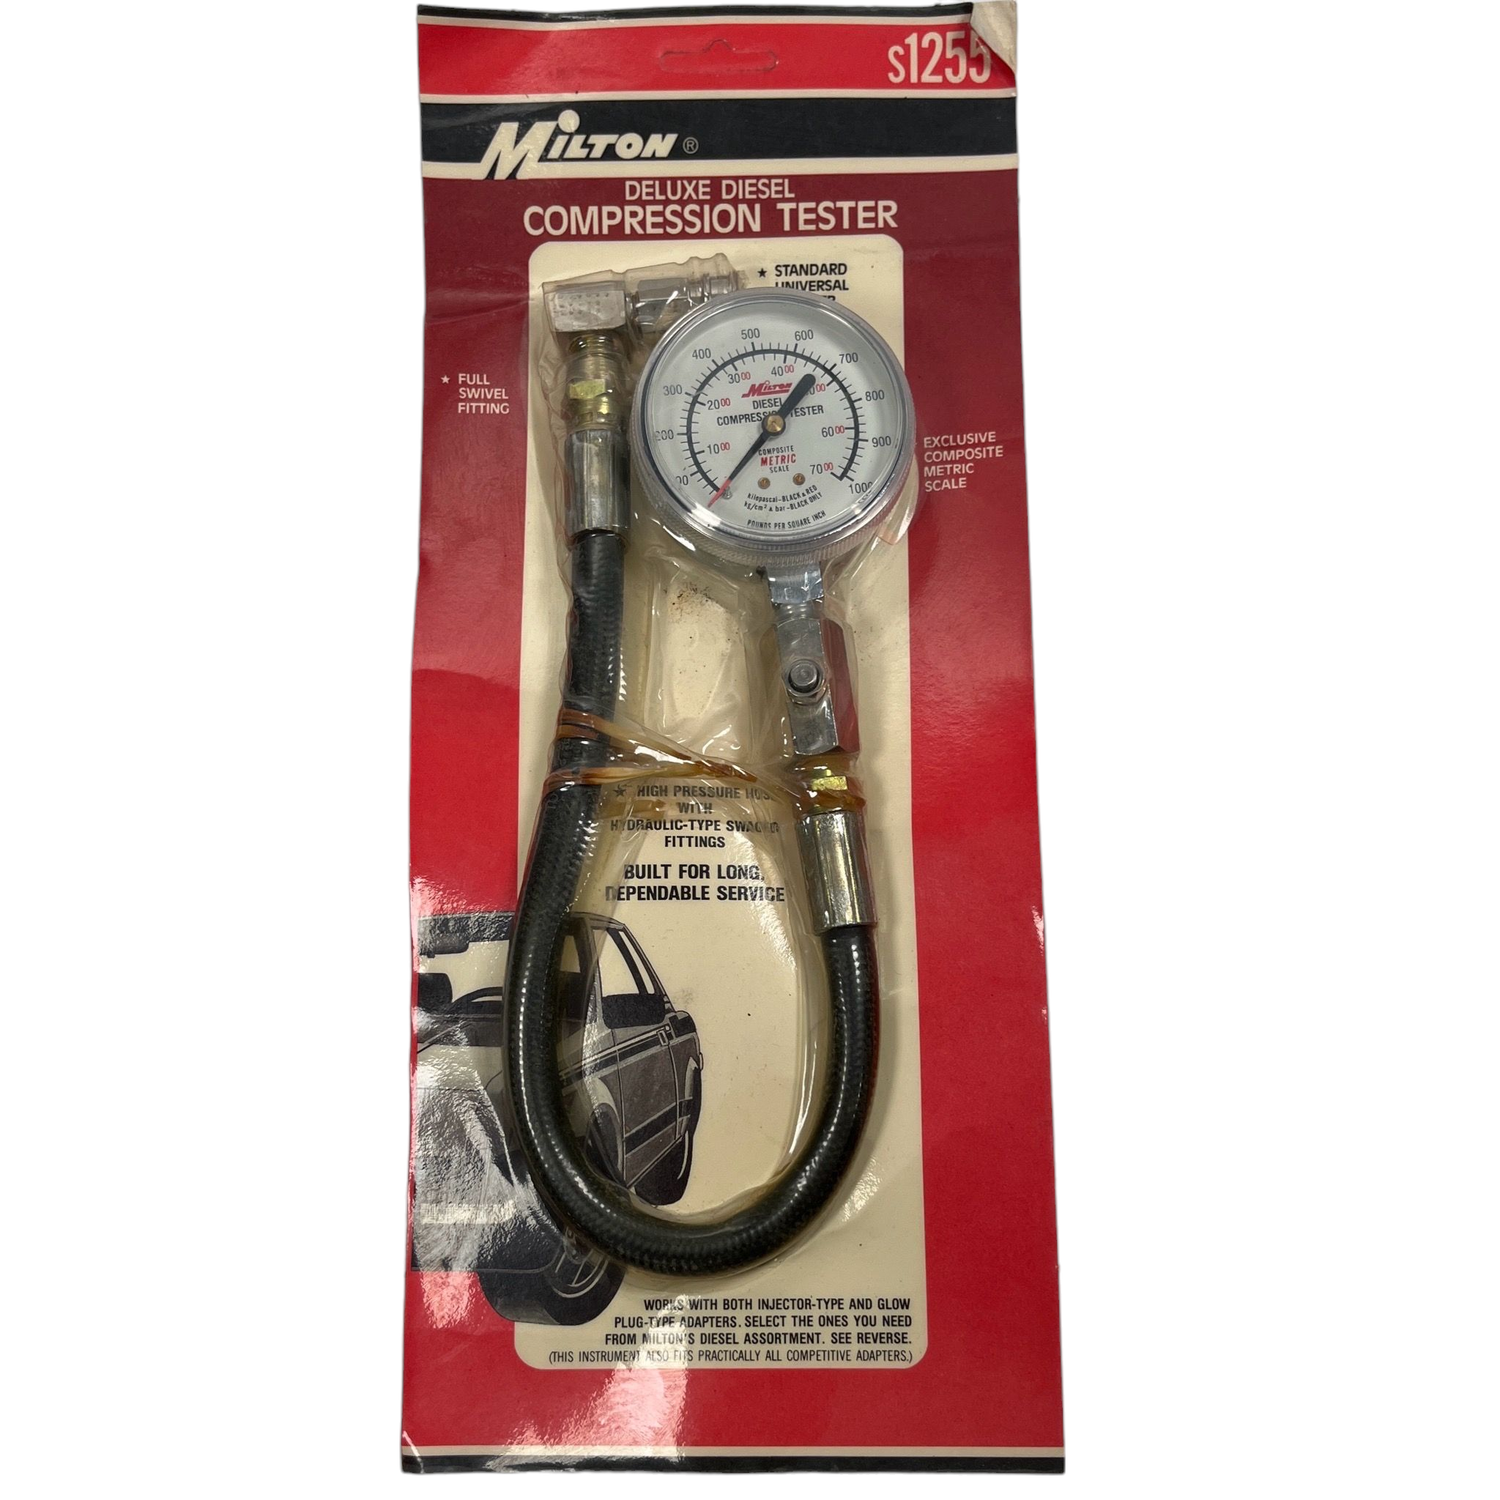 Milton Deluxe Diesel Compression Tester, s1255